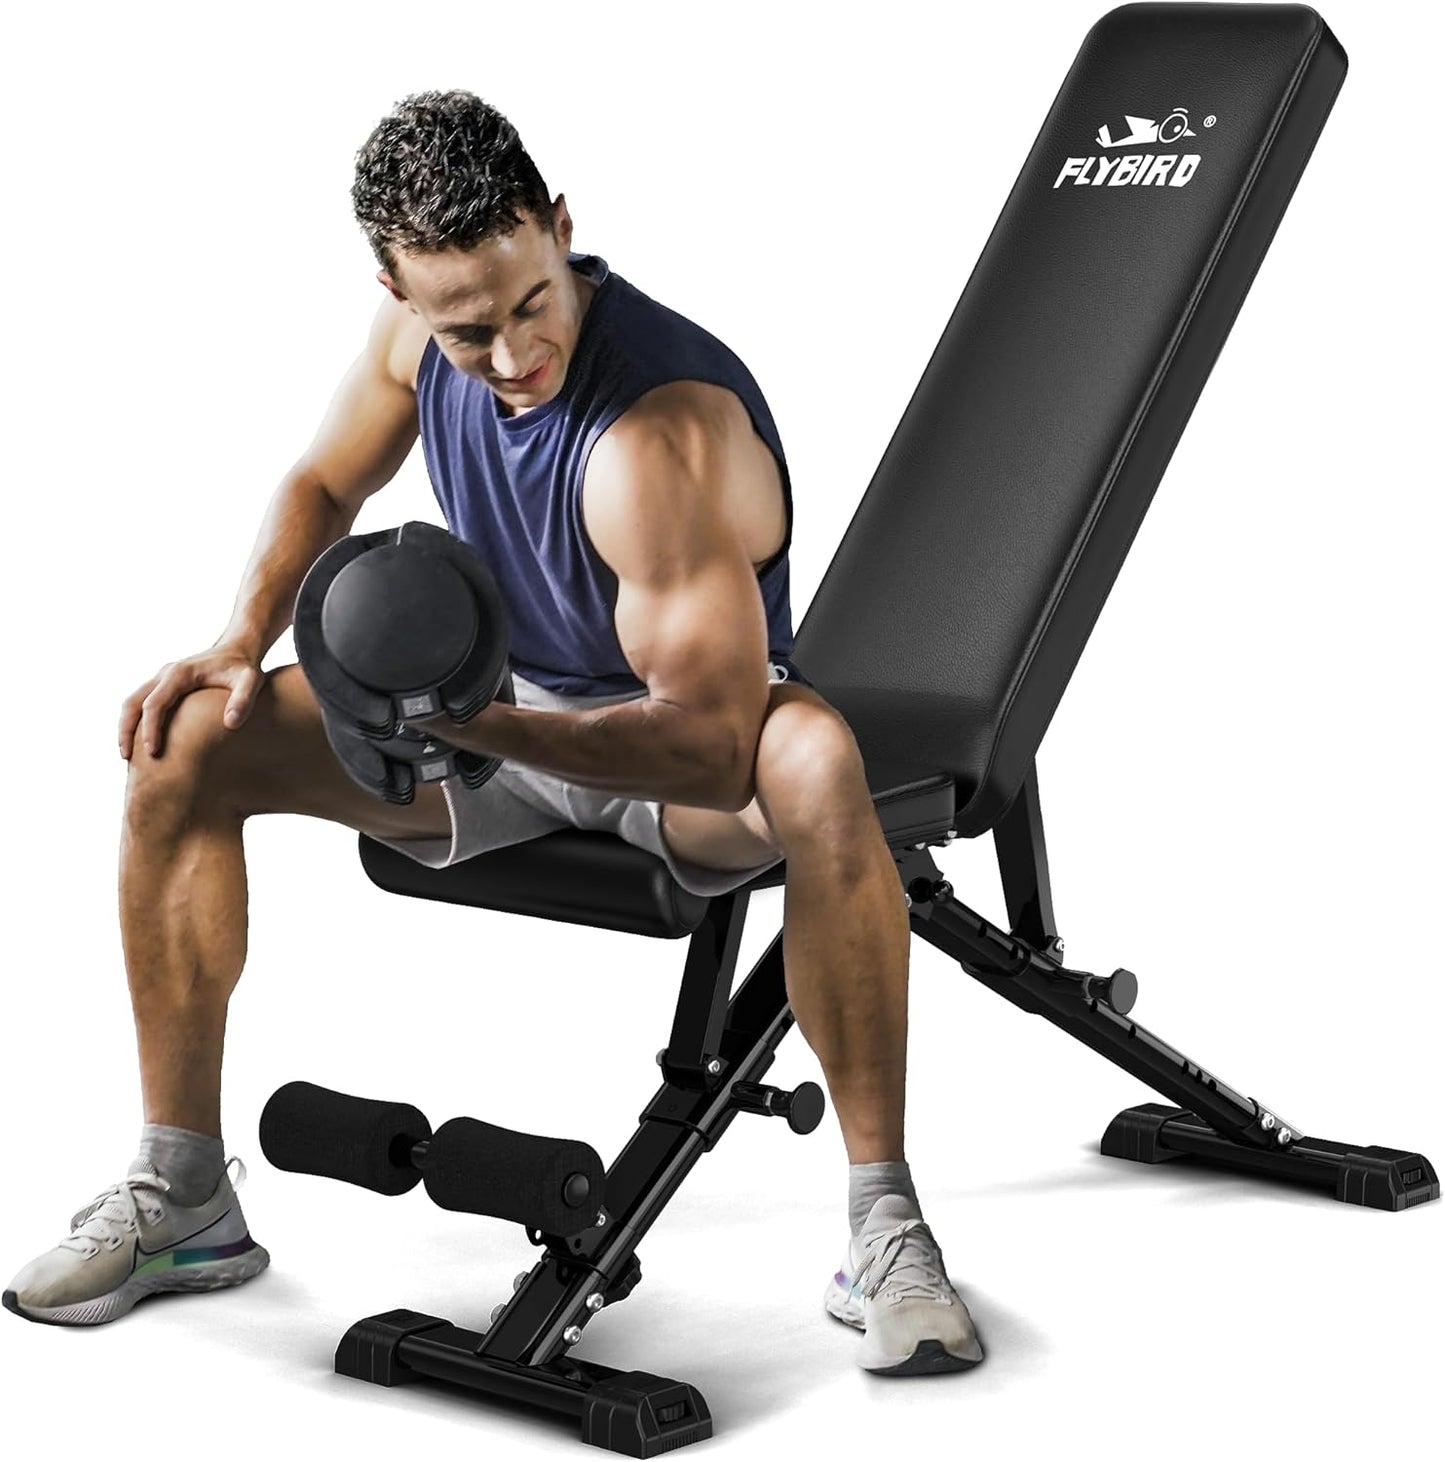 Weight Bench, Adjustable Strength Training Bench for Full Body Workout with Fast Folding-New Version